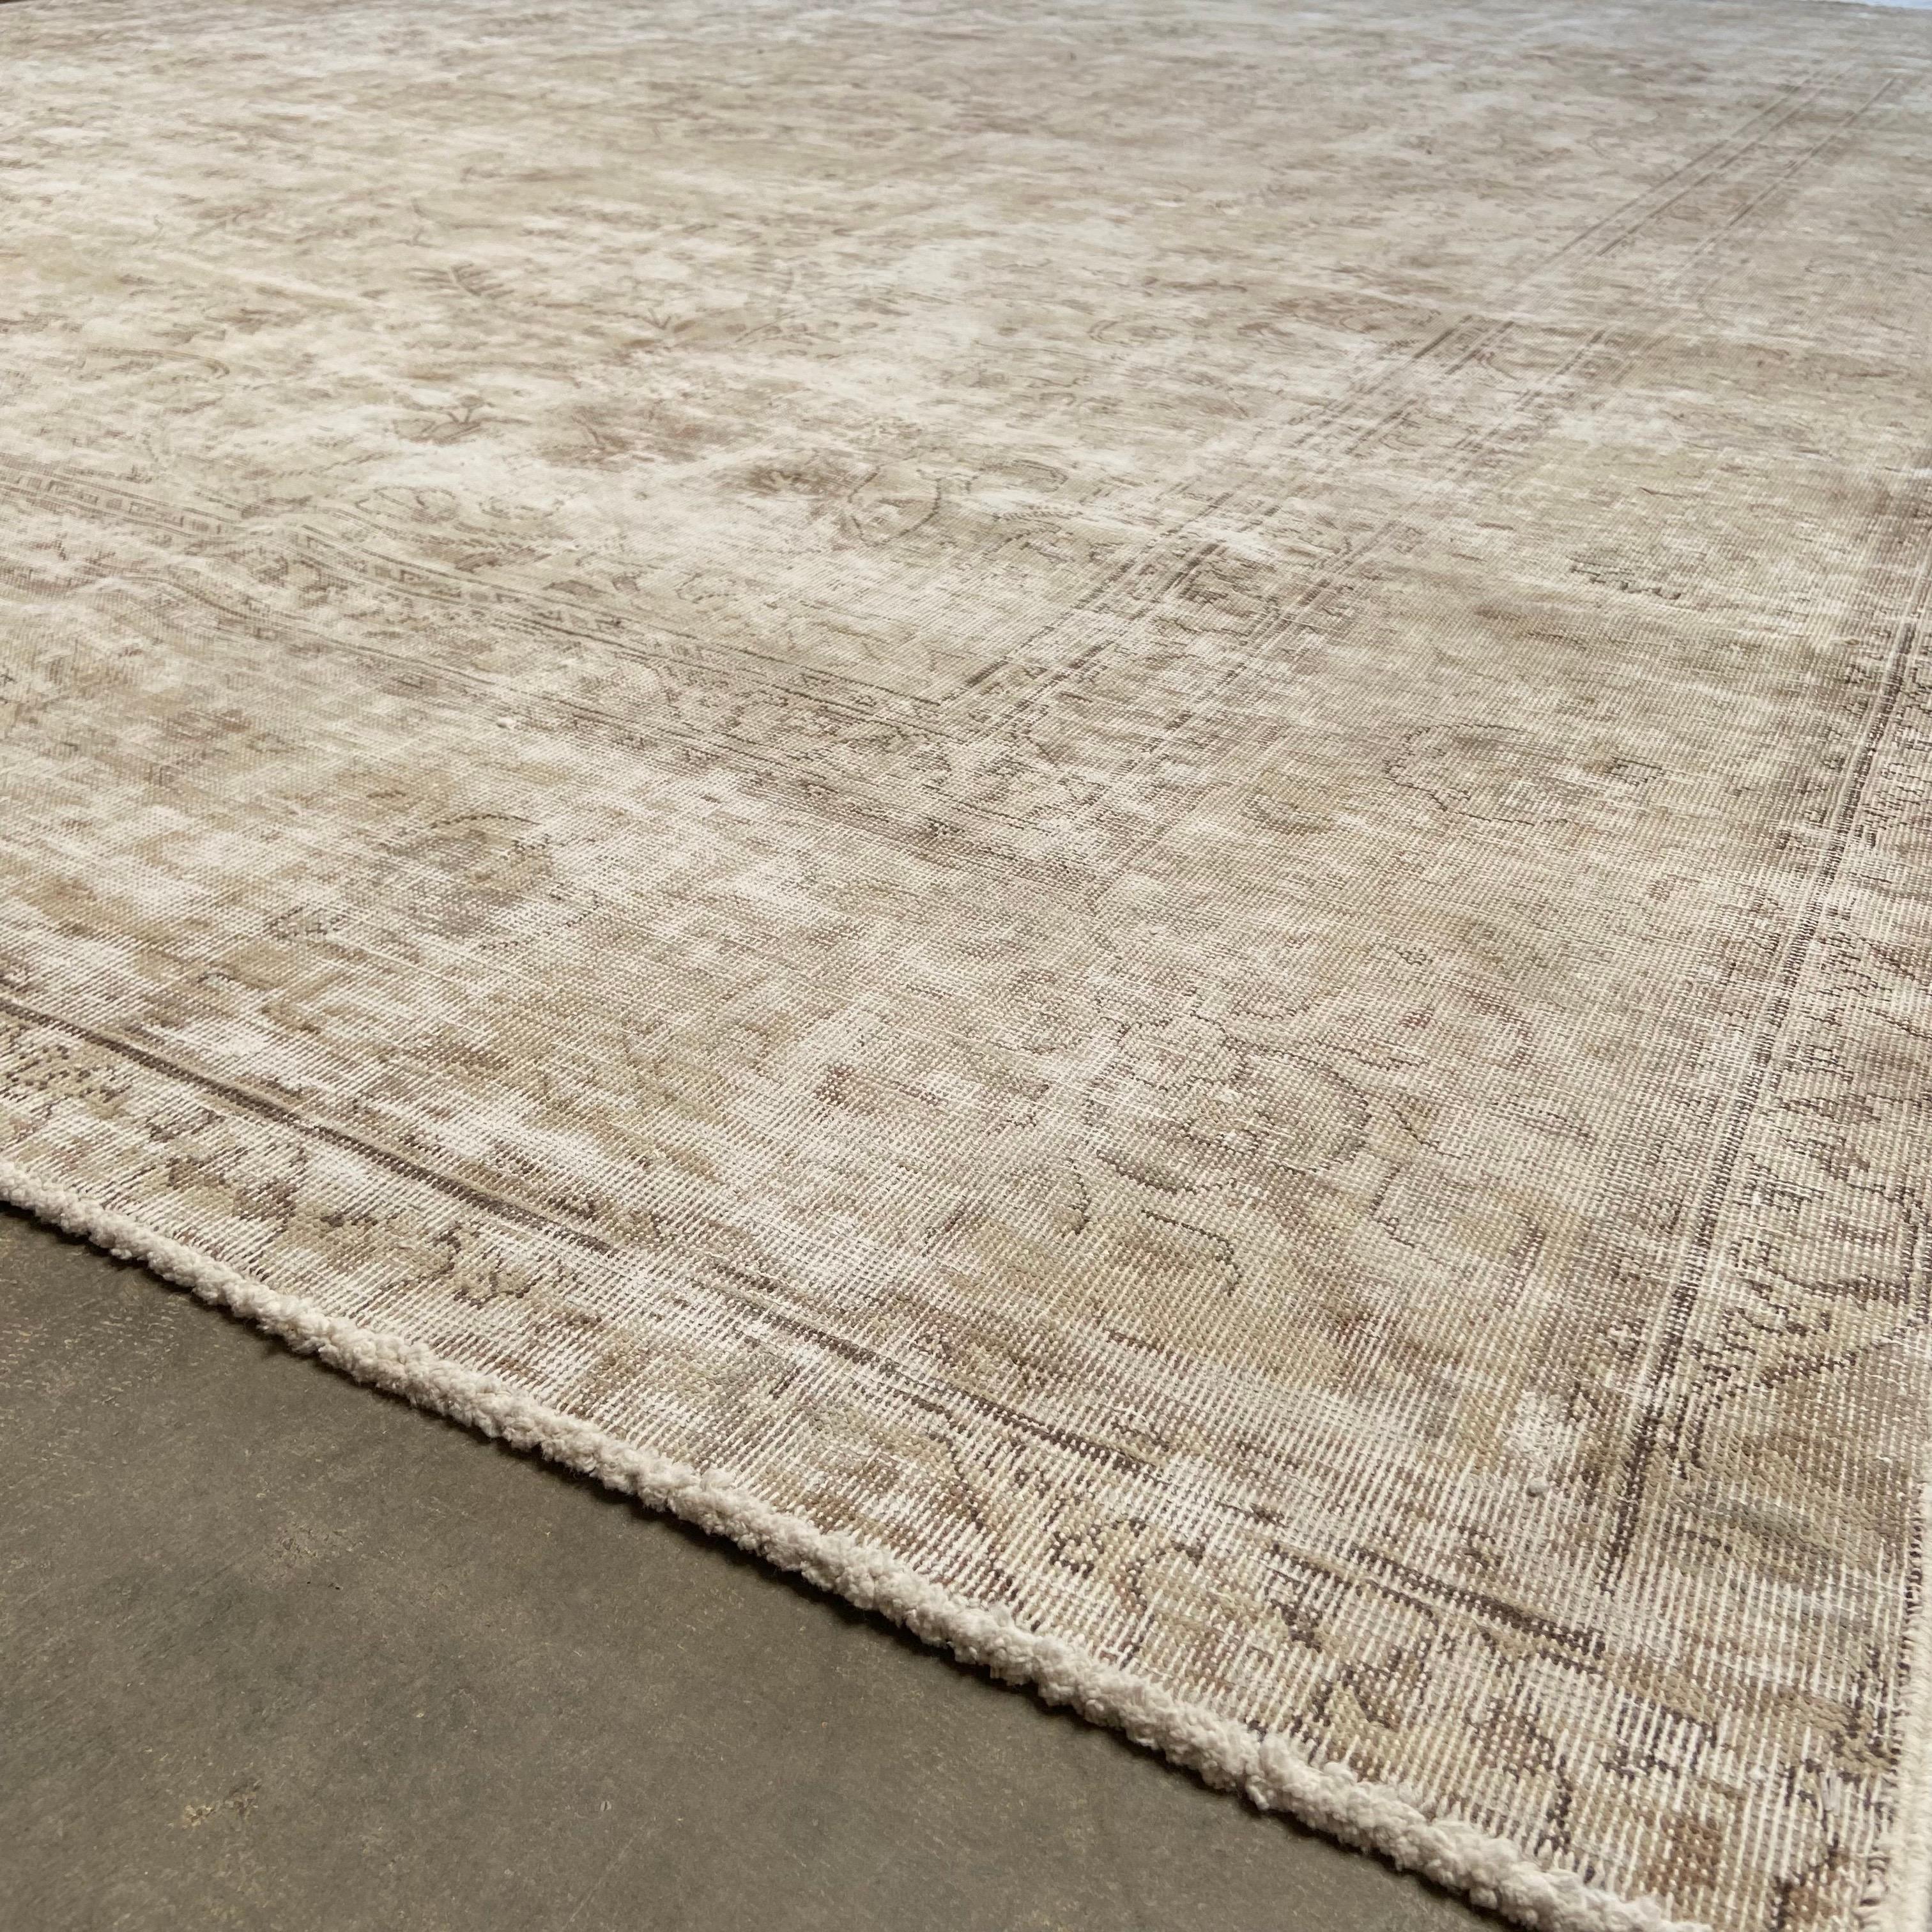 Vintage Turkish Wool Flat Weave Rug in Warm Browns Taupes and Creams For Sale 1